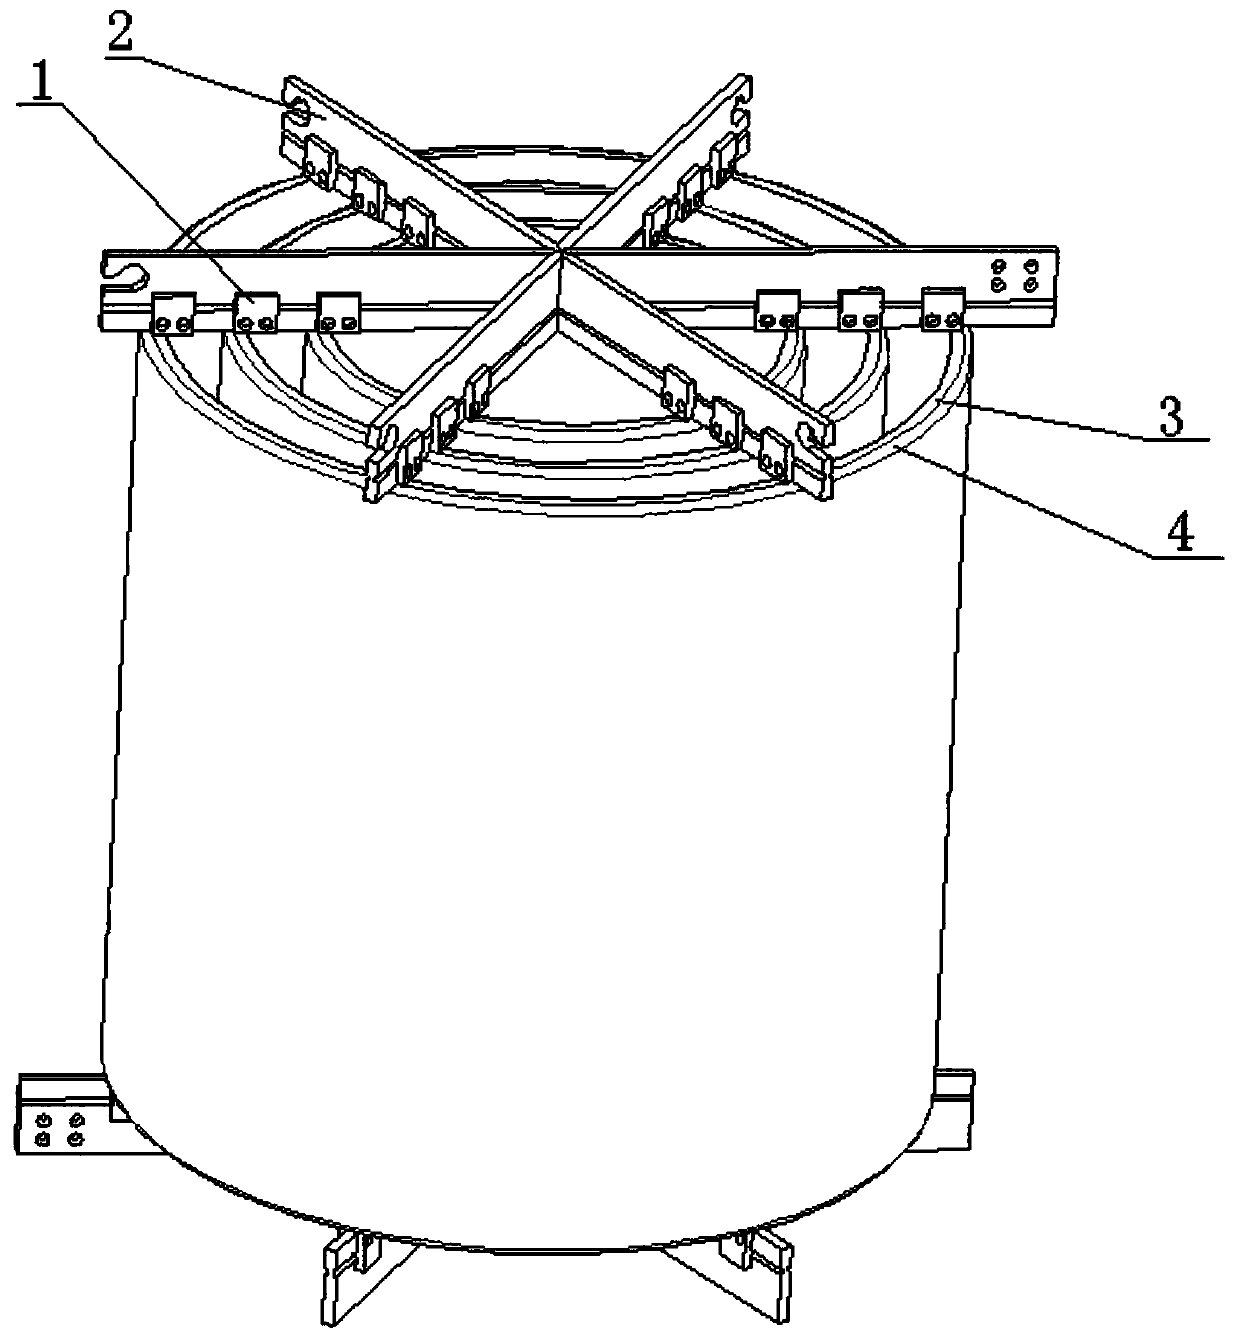 Dry-type air-core reactor with interchangeable splicing structure